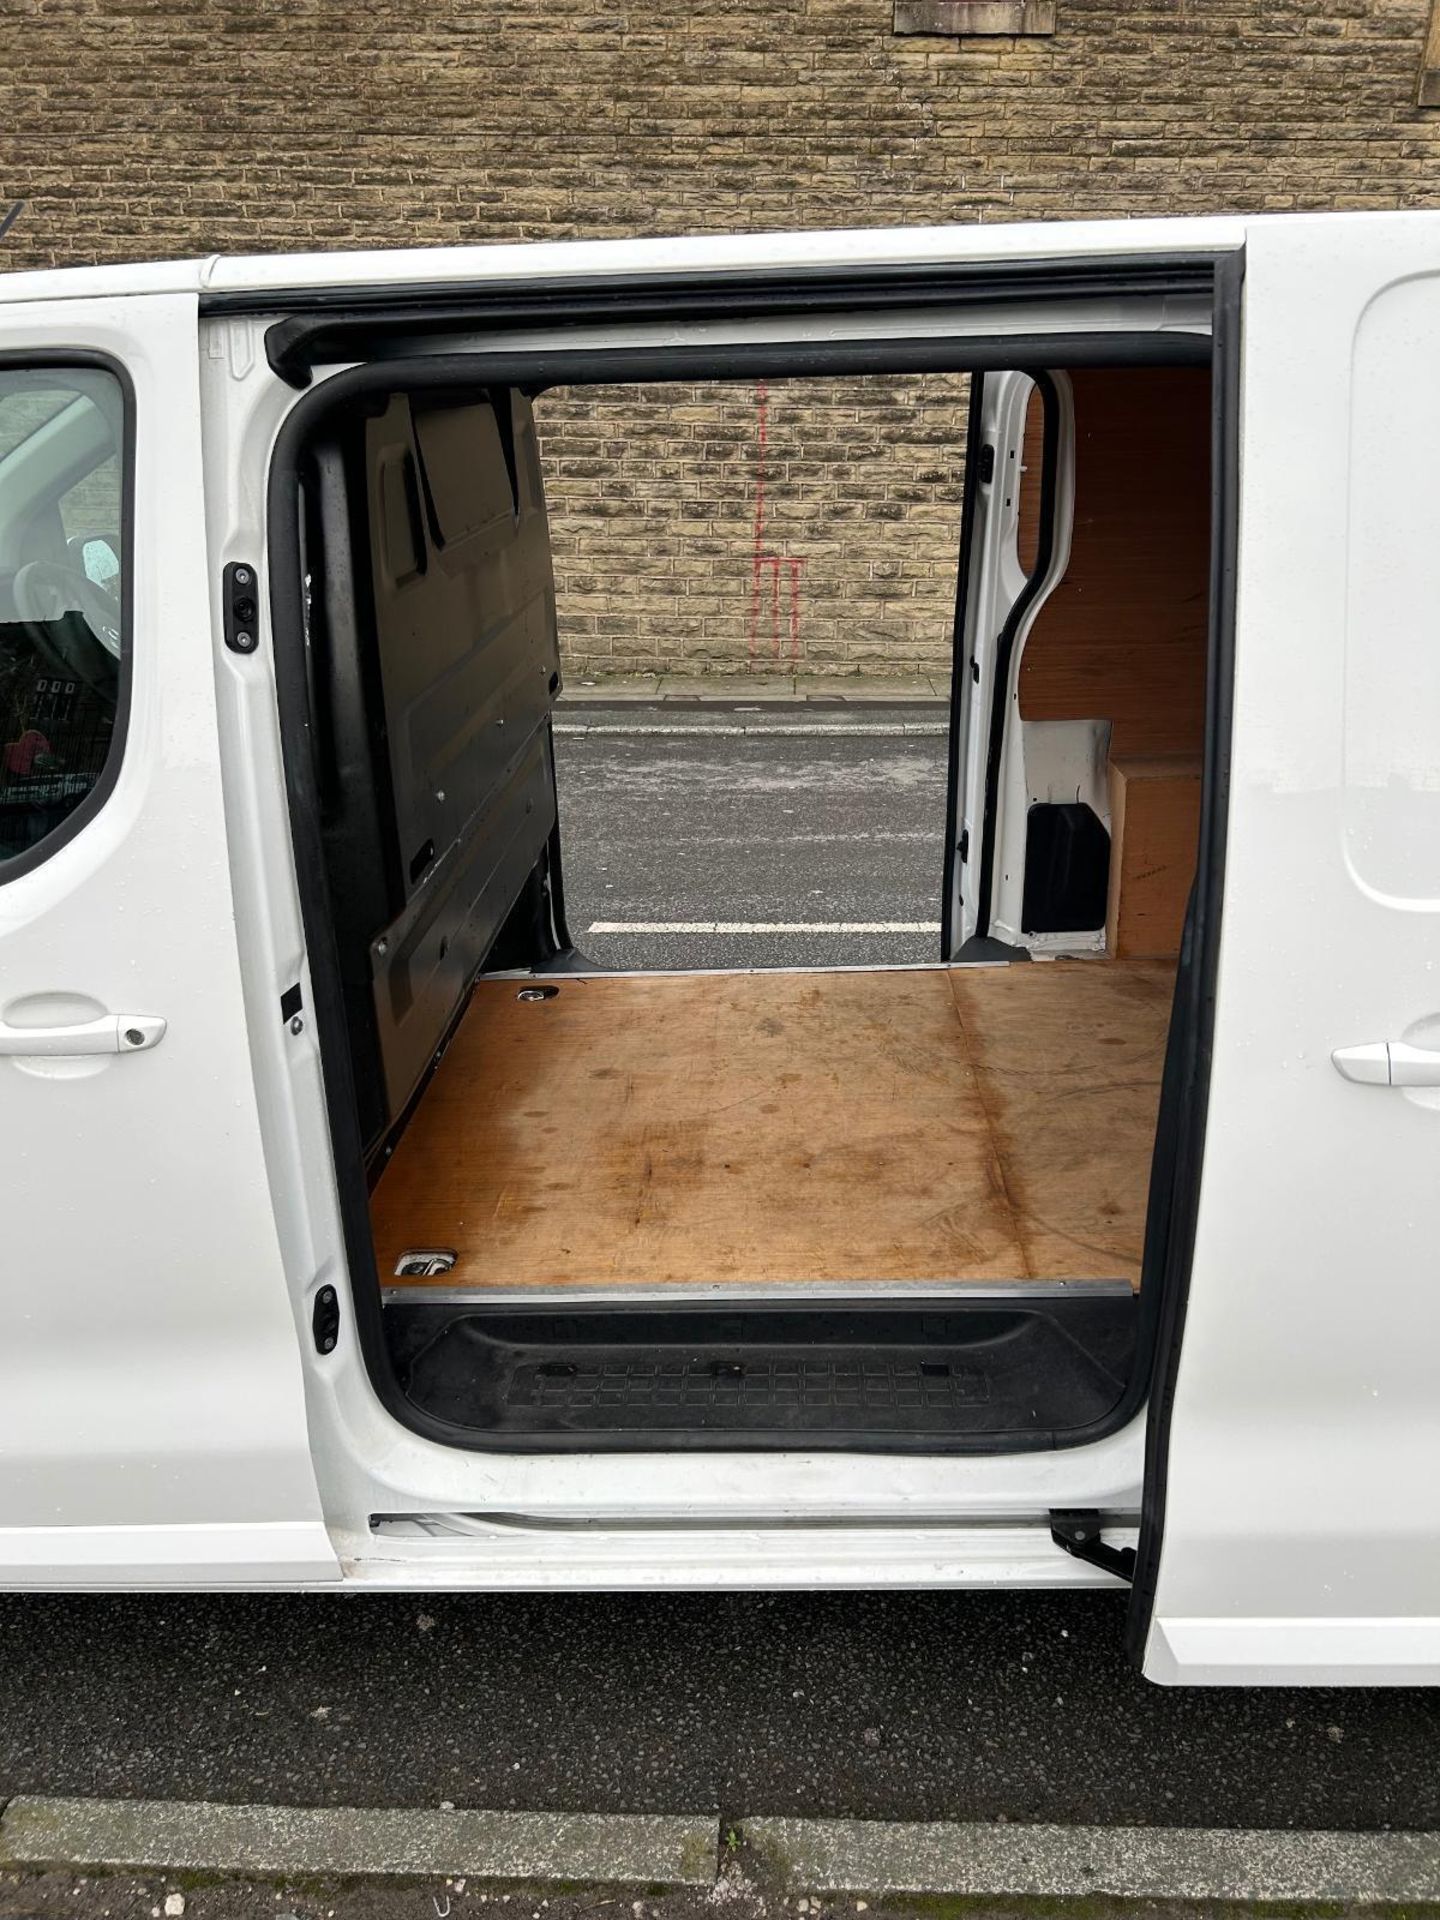 2021 VAUXHALL VIVARO SPORTIVE 24K MILES ONLY - READY FOR WORK! - Image 7 of 12